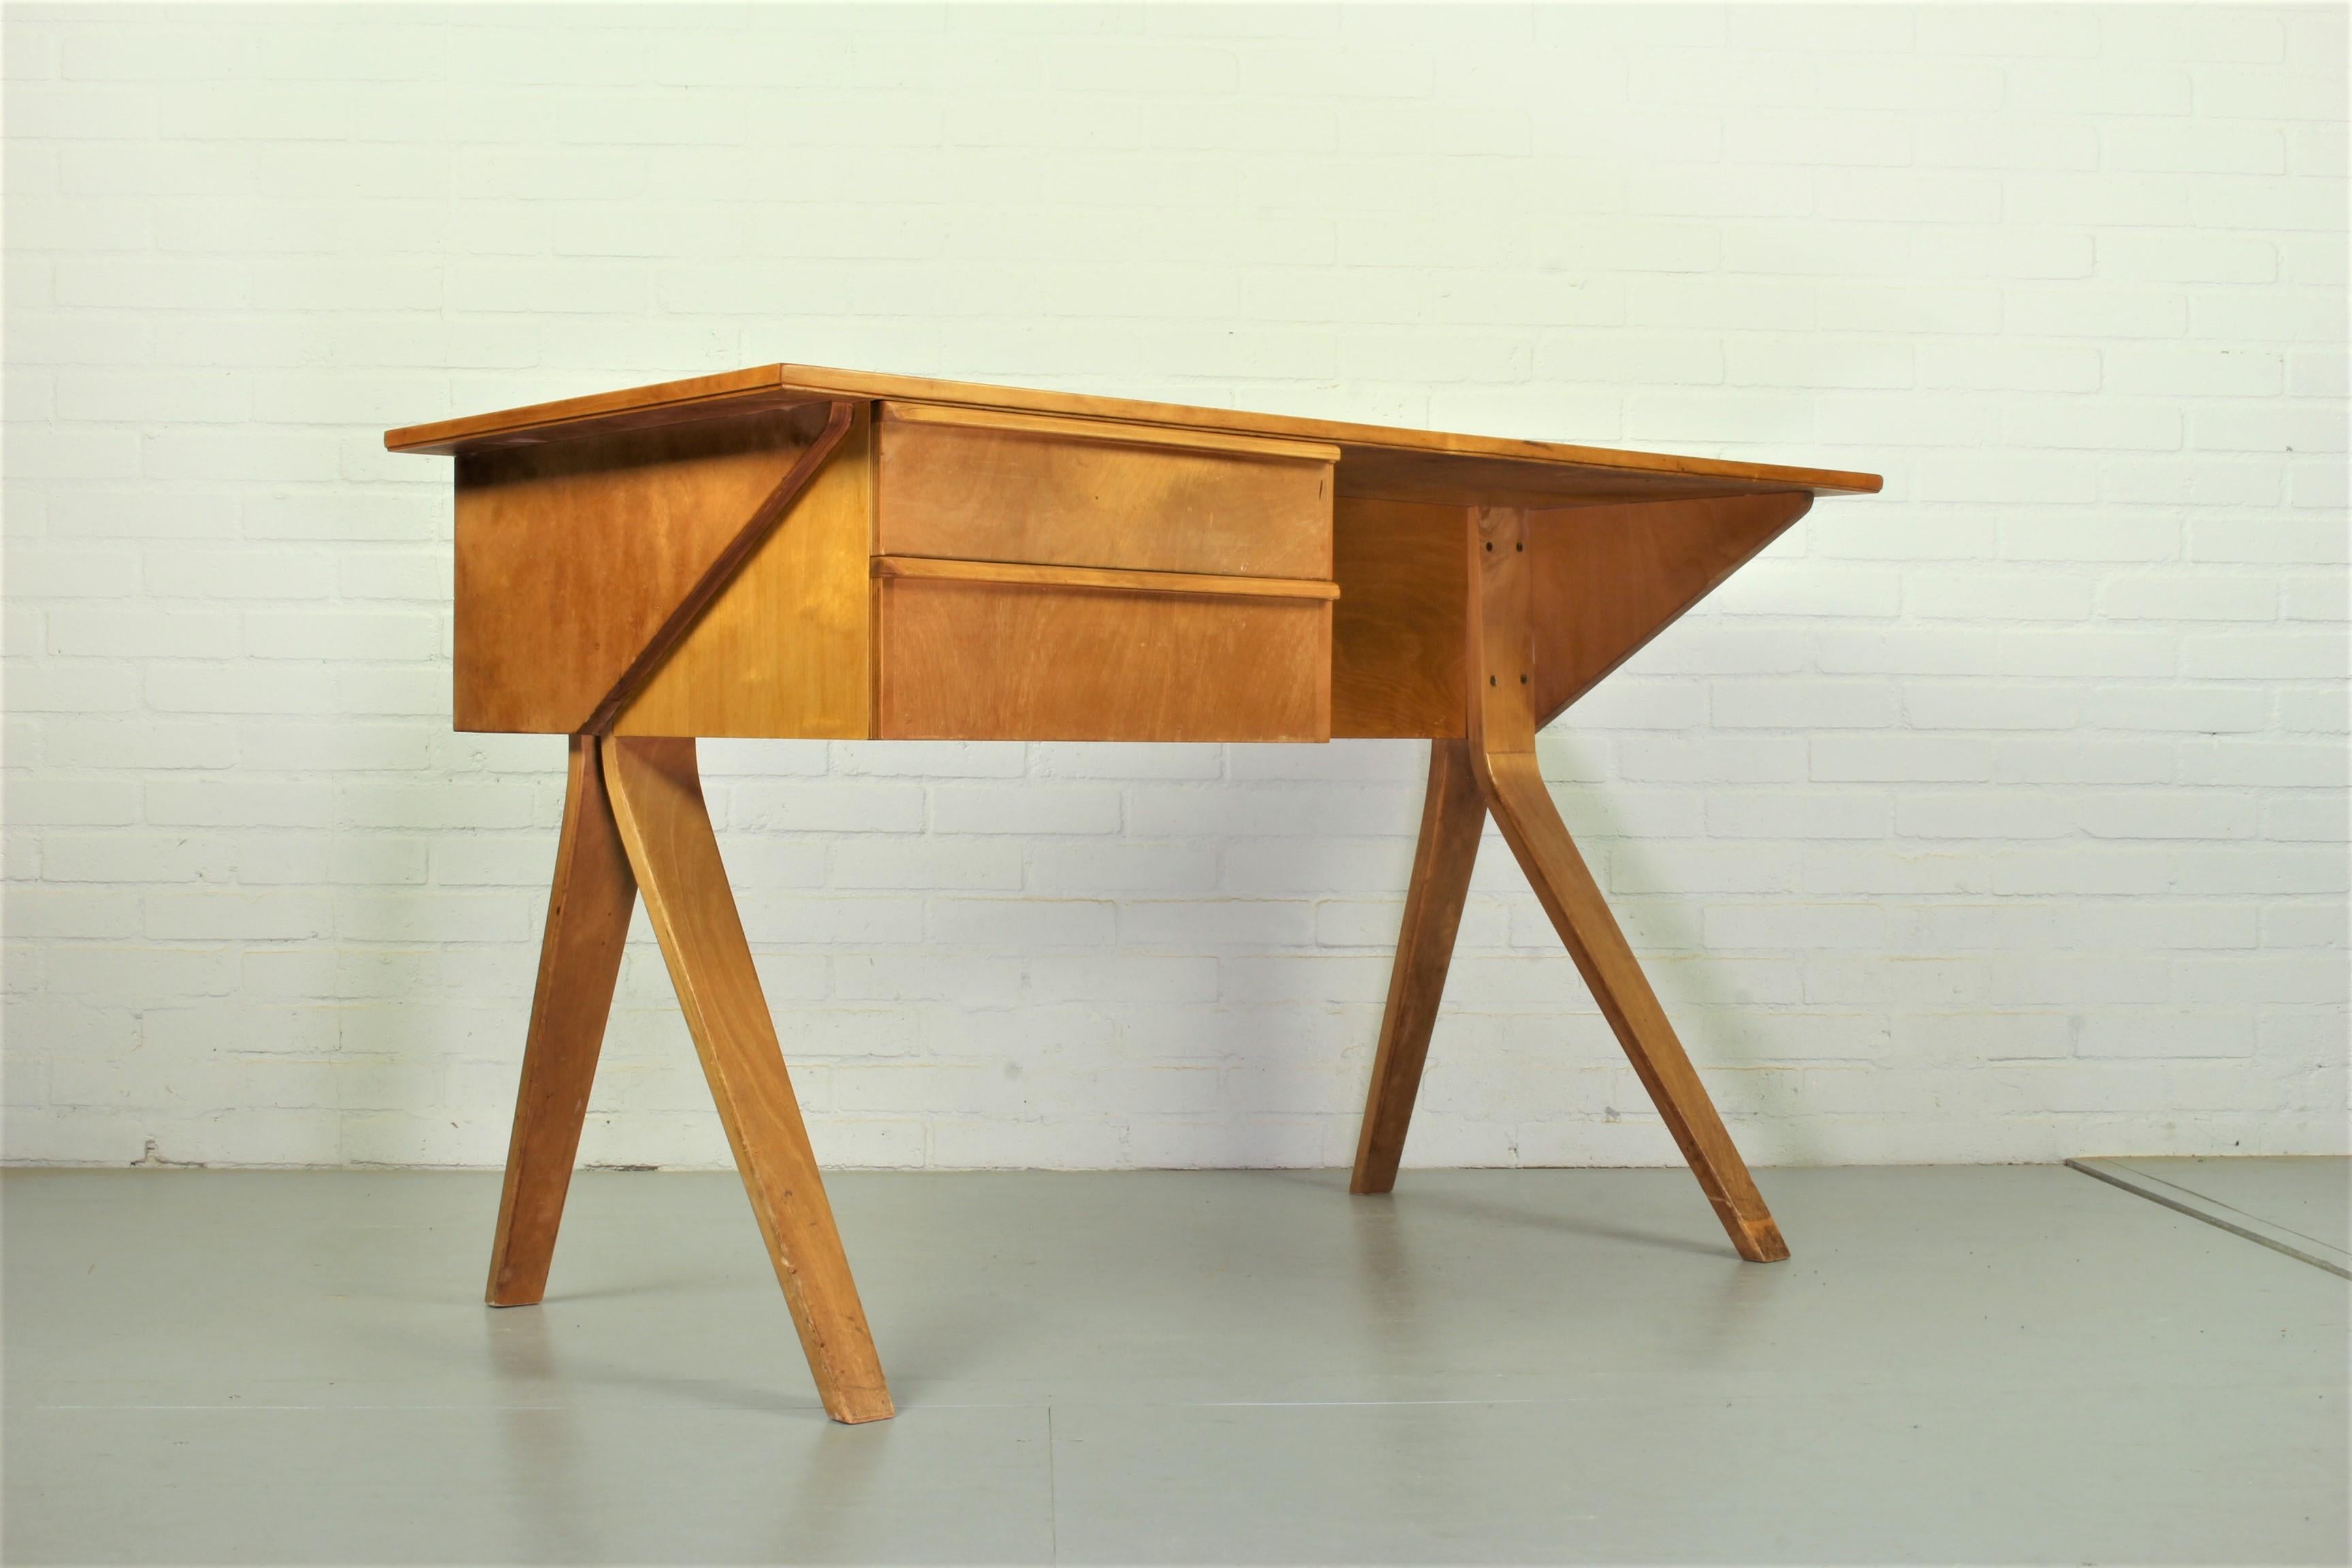 An early plywood model EB02 desk on splayed legs, designed by Cees Braakman for Pastoe, Netherlands, 1952. Braakman was the head designer at UMS Pastoe, Utrecht, one of the largest and most respected Dutch modernist furniture manufacturers of the